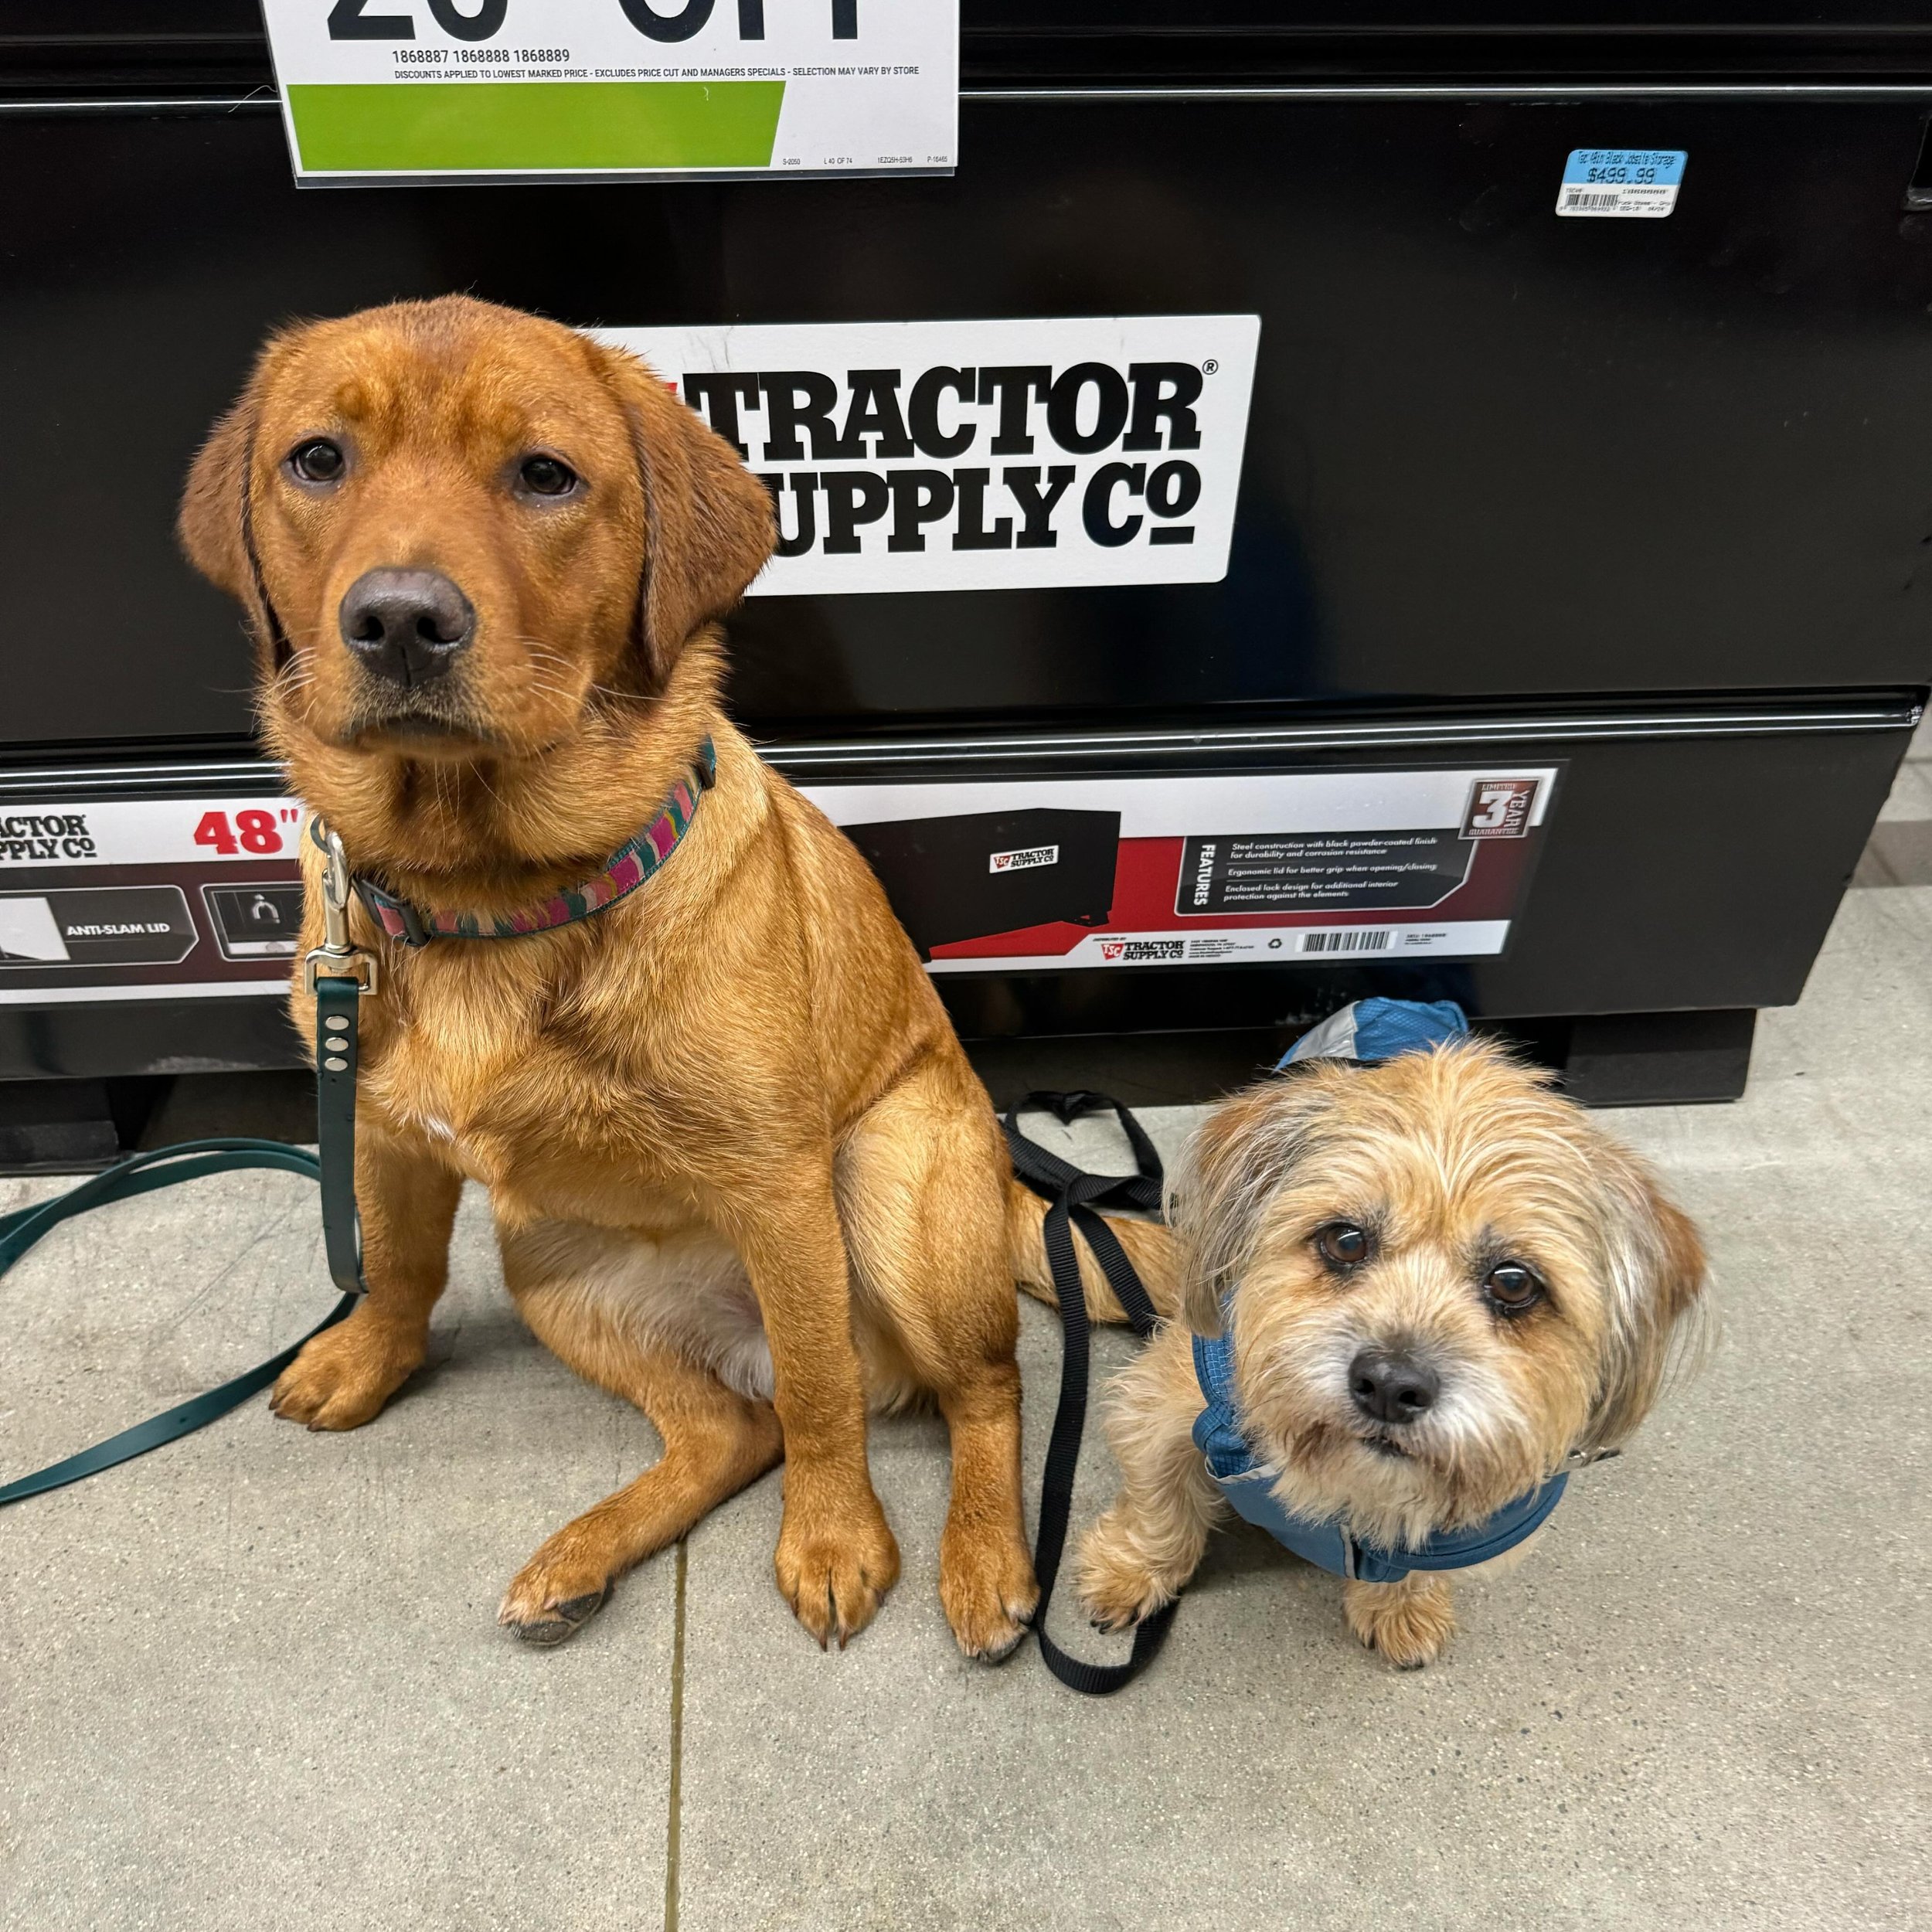 Penny and Teddy at Tractor supply!